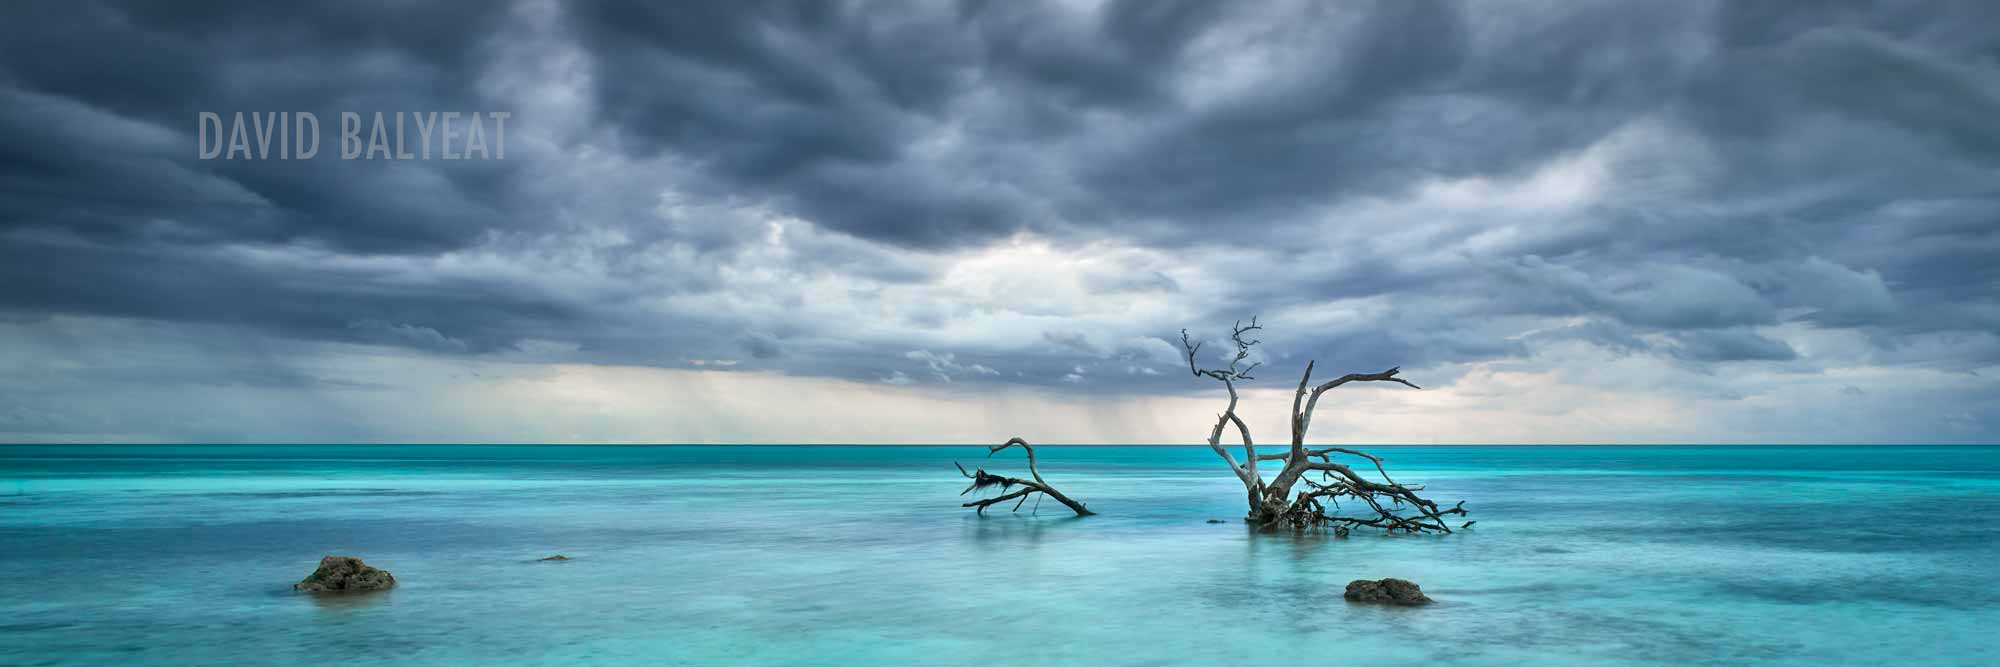 Florida Keys mangrove tree in water cerulean silence panoramic high-definition landscape photography